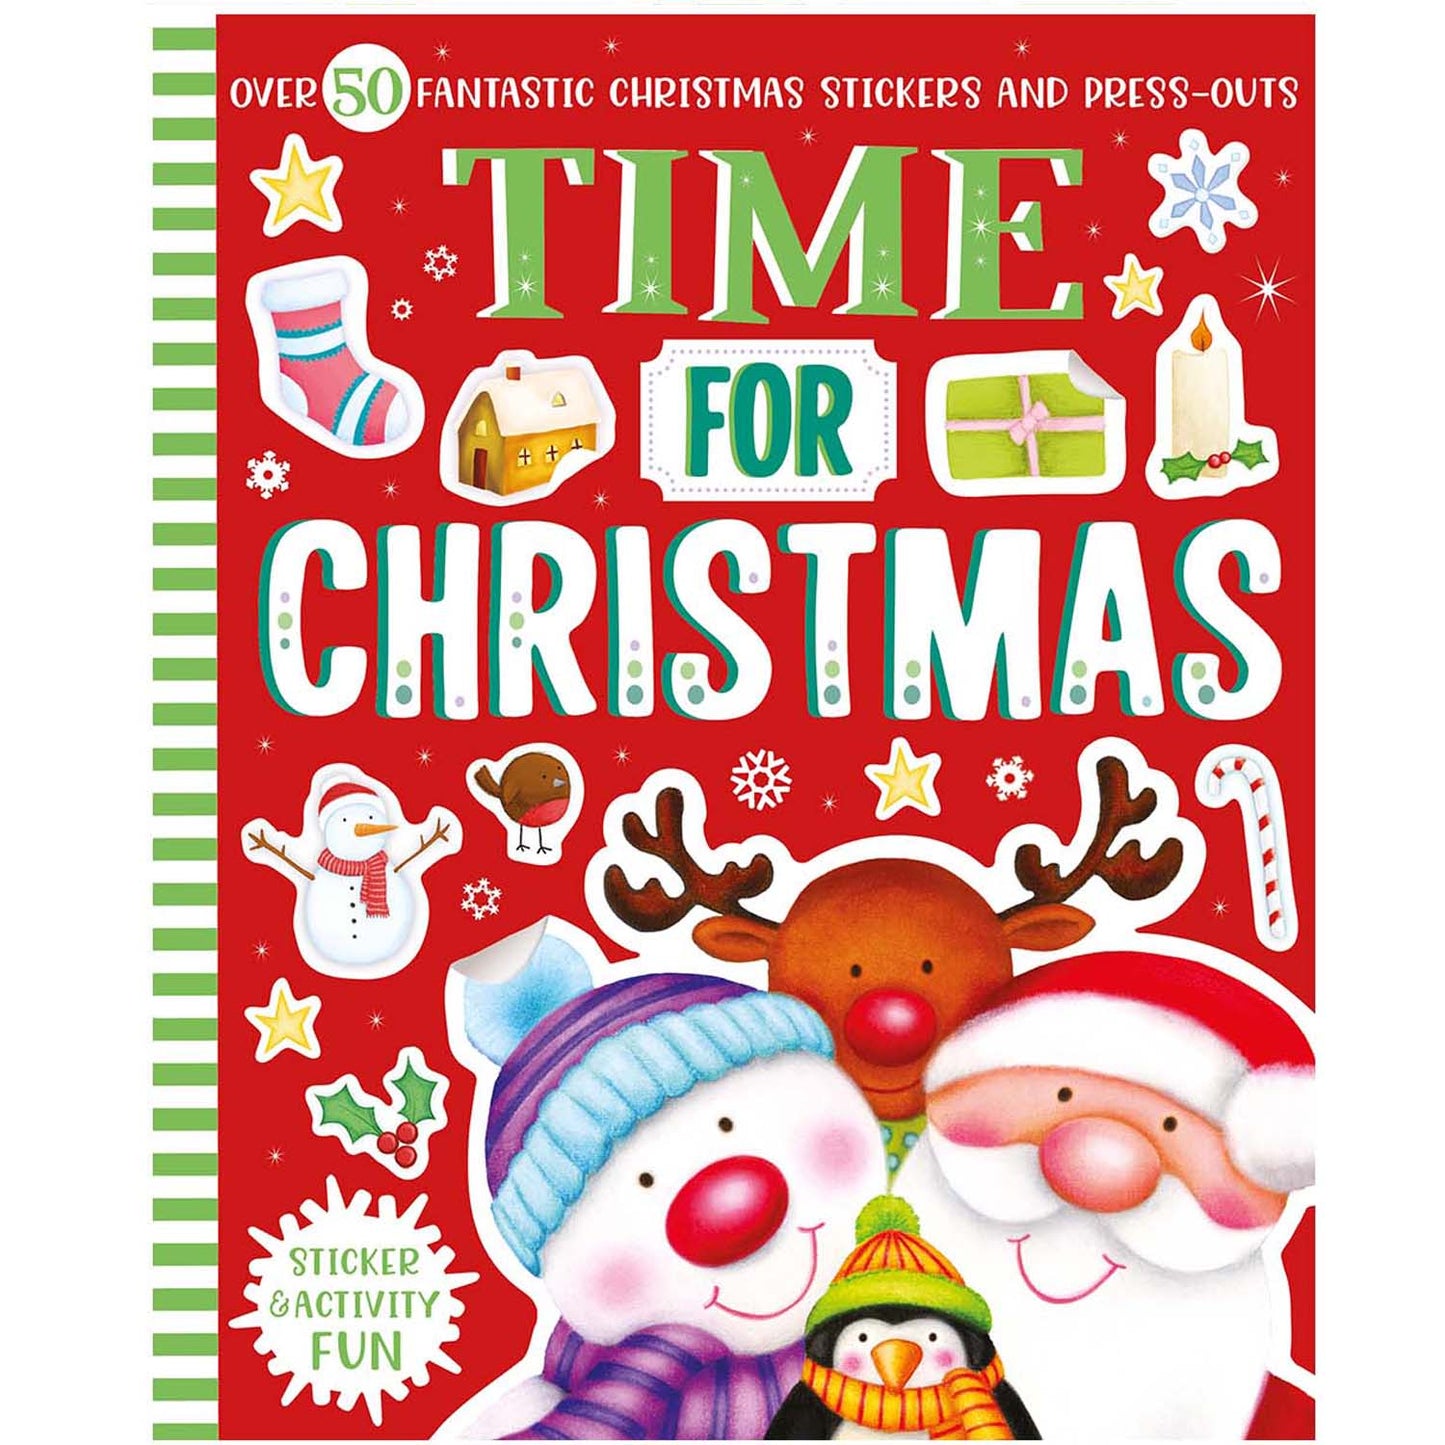 Time for Christmas Sticker & Activity Fun